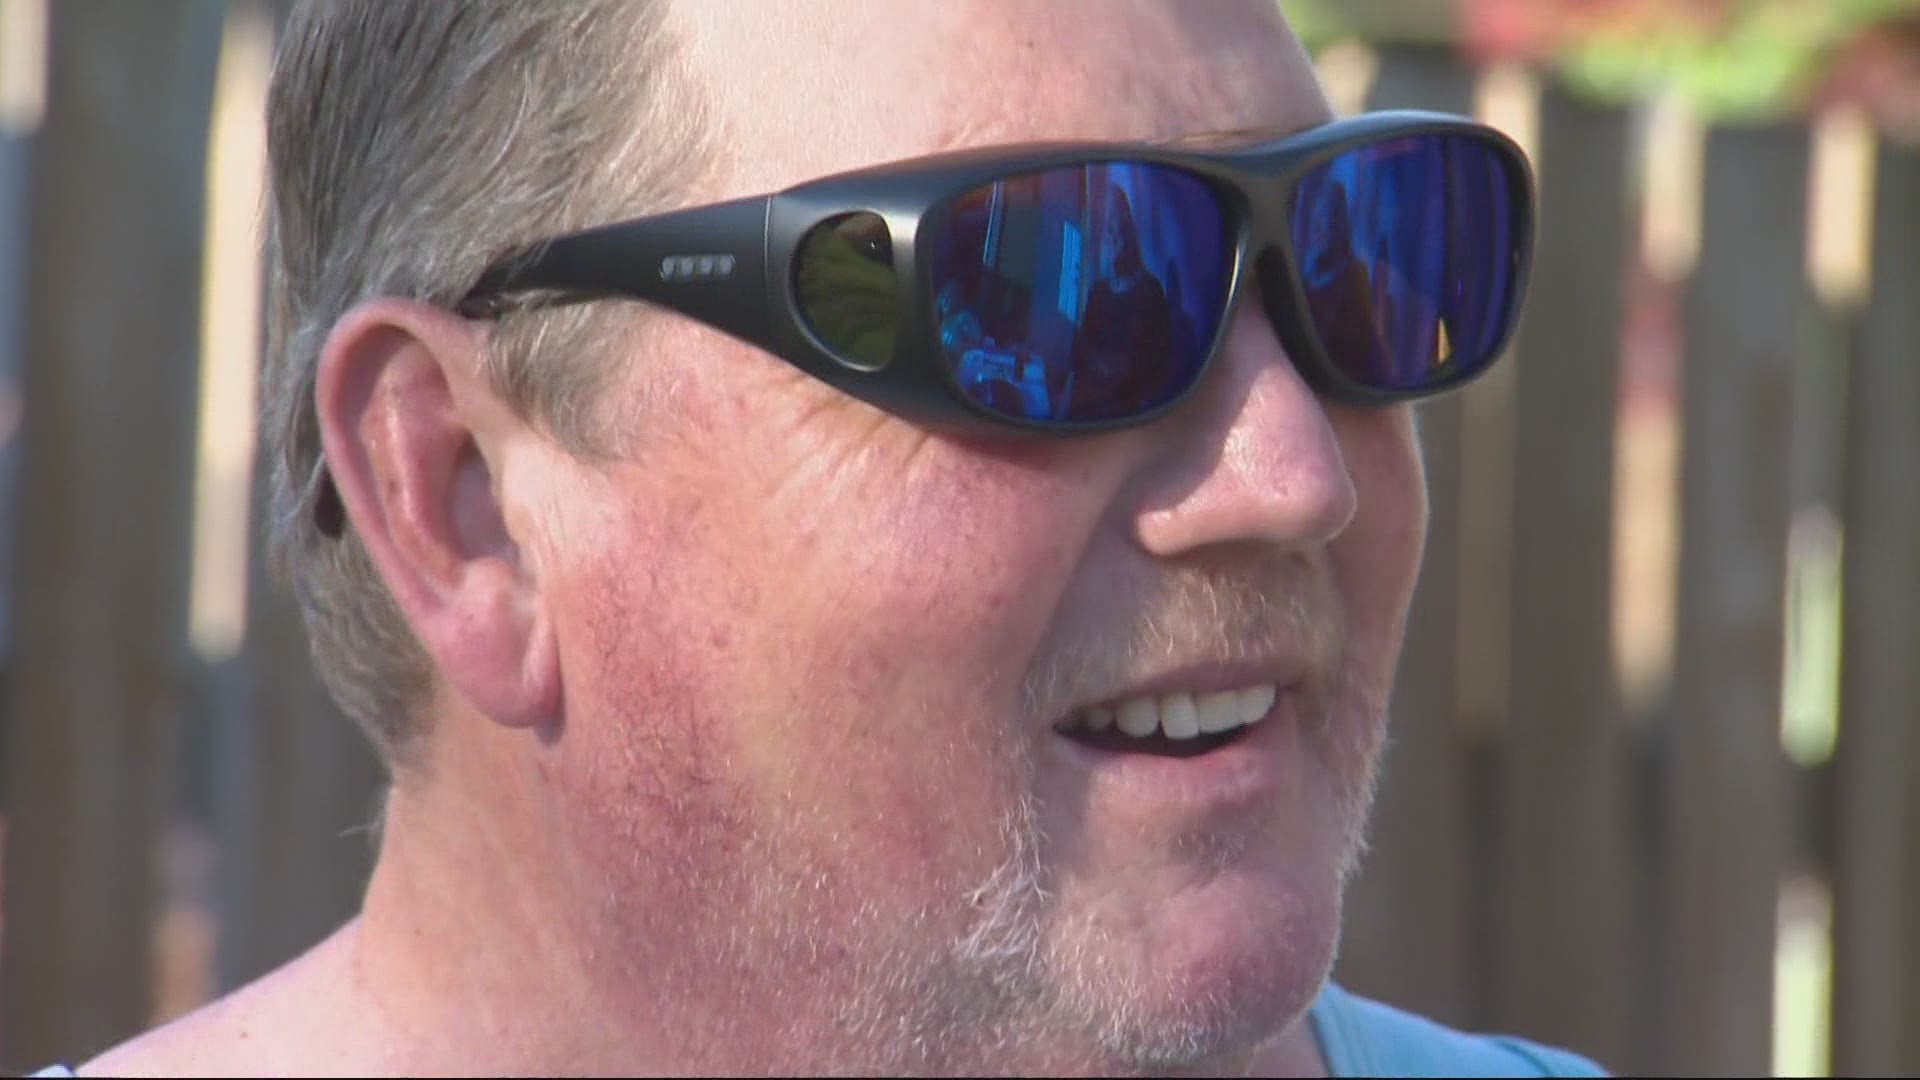 Family surprises color blind dad with color-correcting glasses